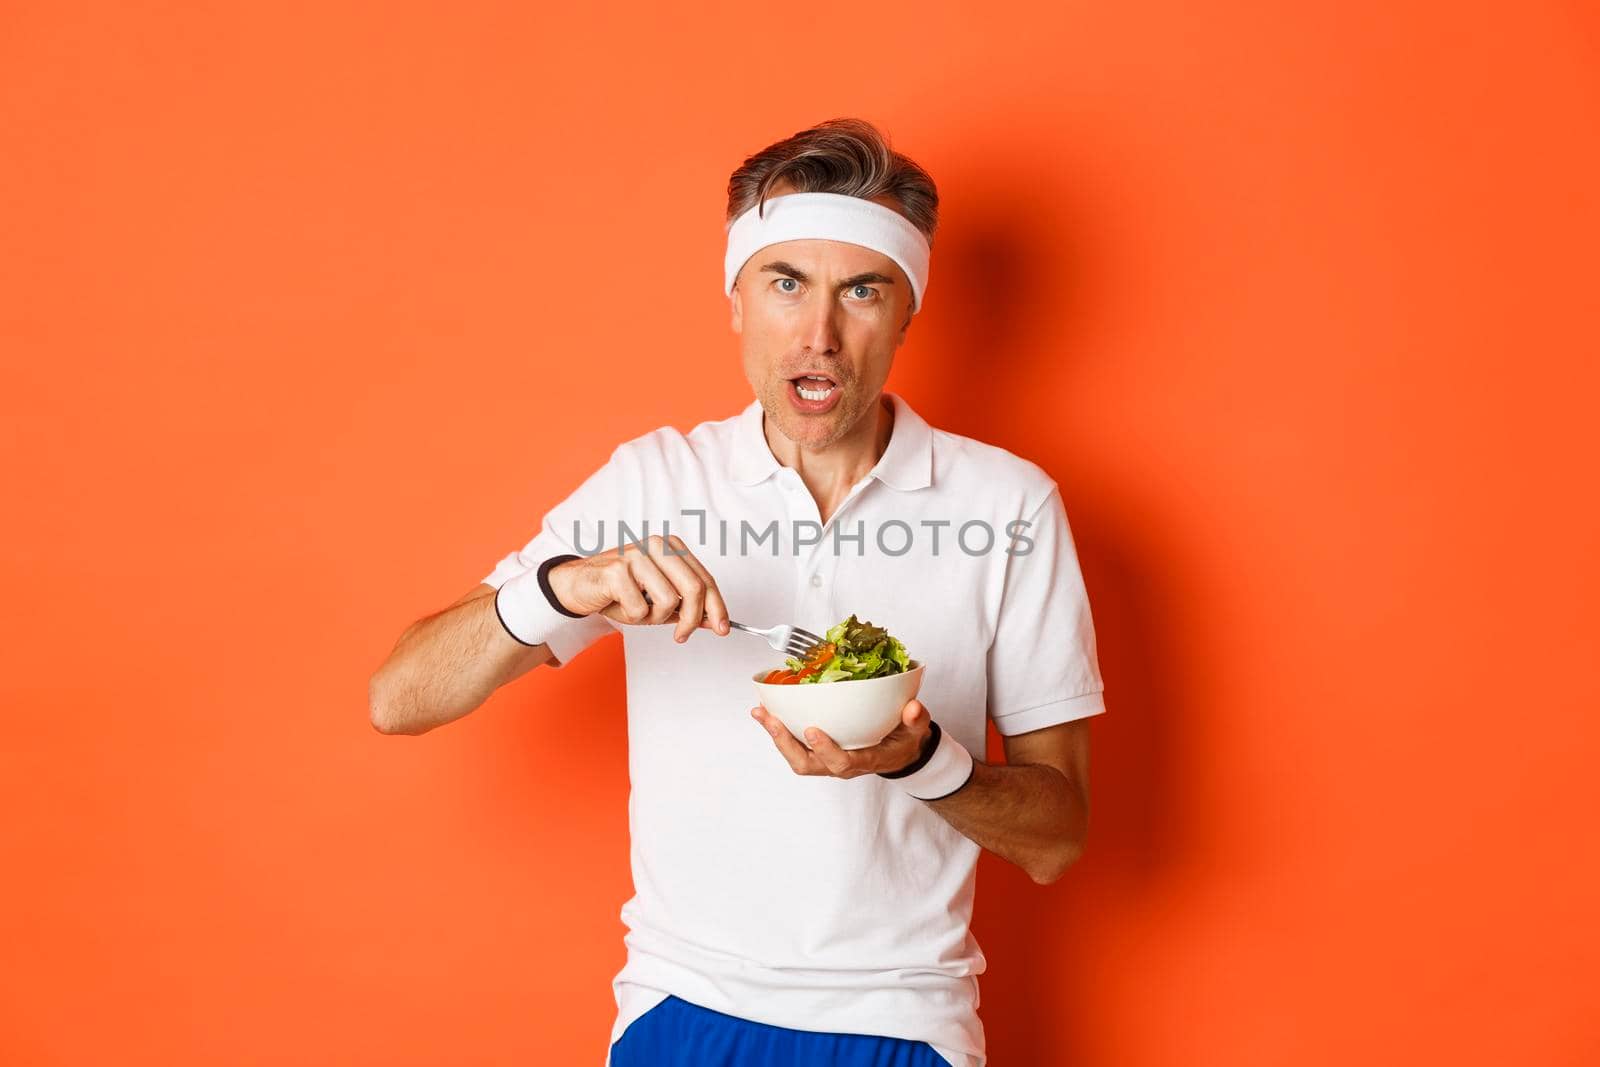 Portrait of angry middle-aged male athlete, eating salad and looking disturbed, standing over orange background.